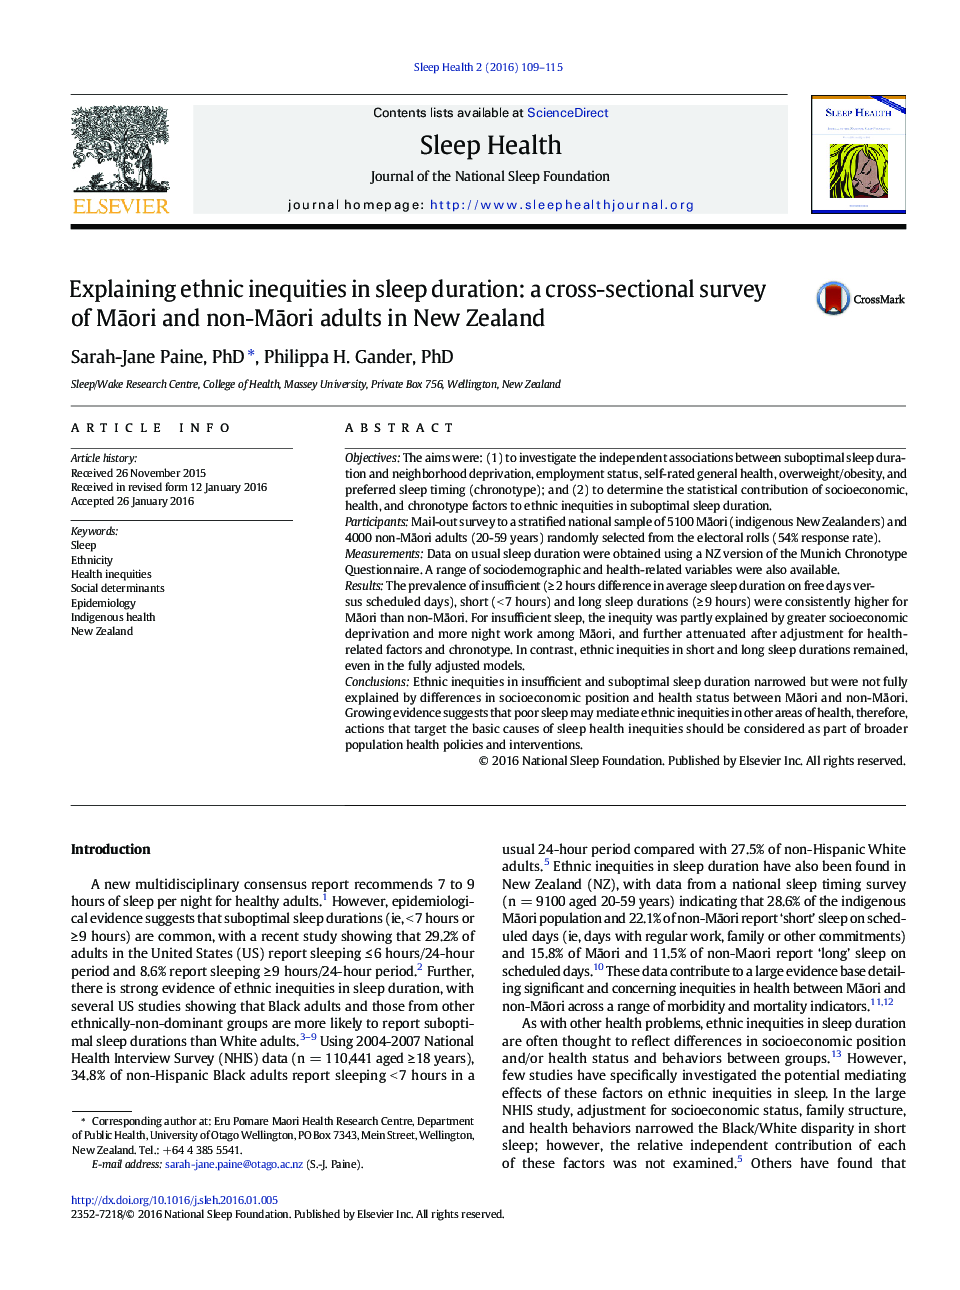 Explaining ethnic inequities in sleep duration: a cross-sectional survey of Māori and non-Māori adults in New Zealand